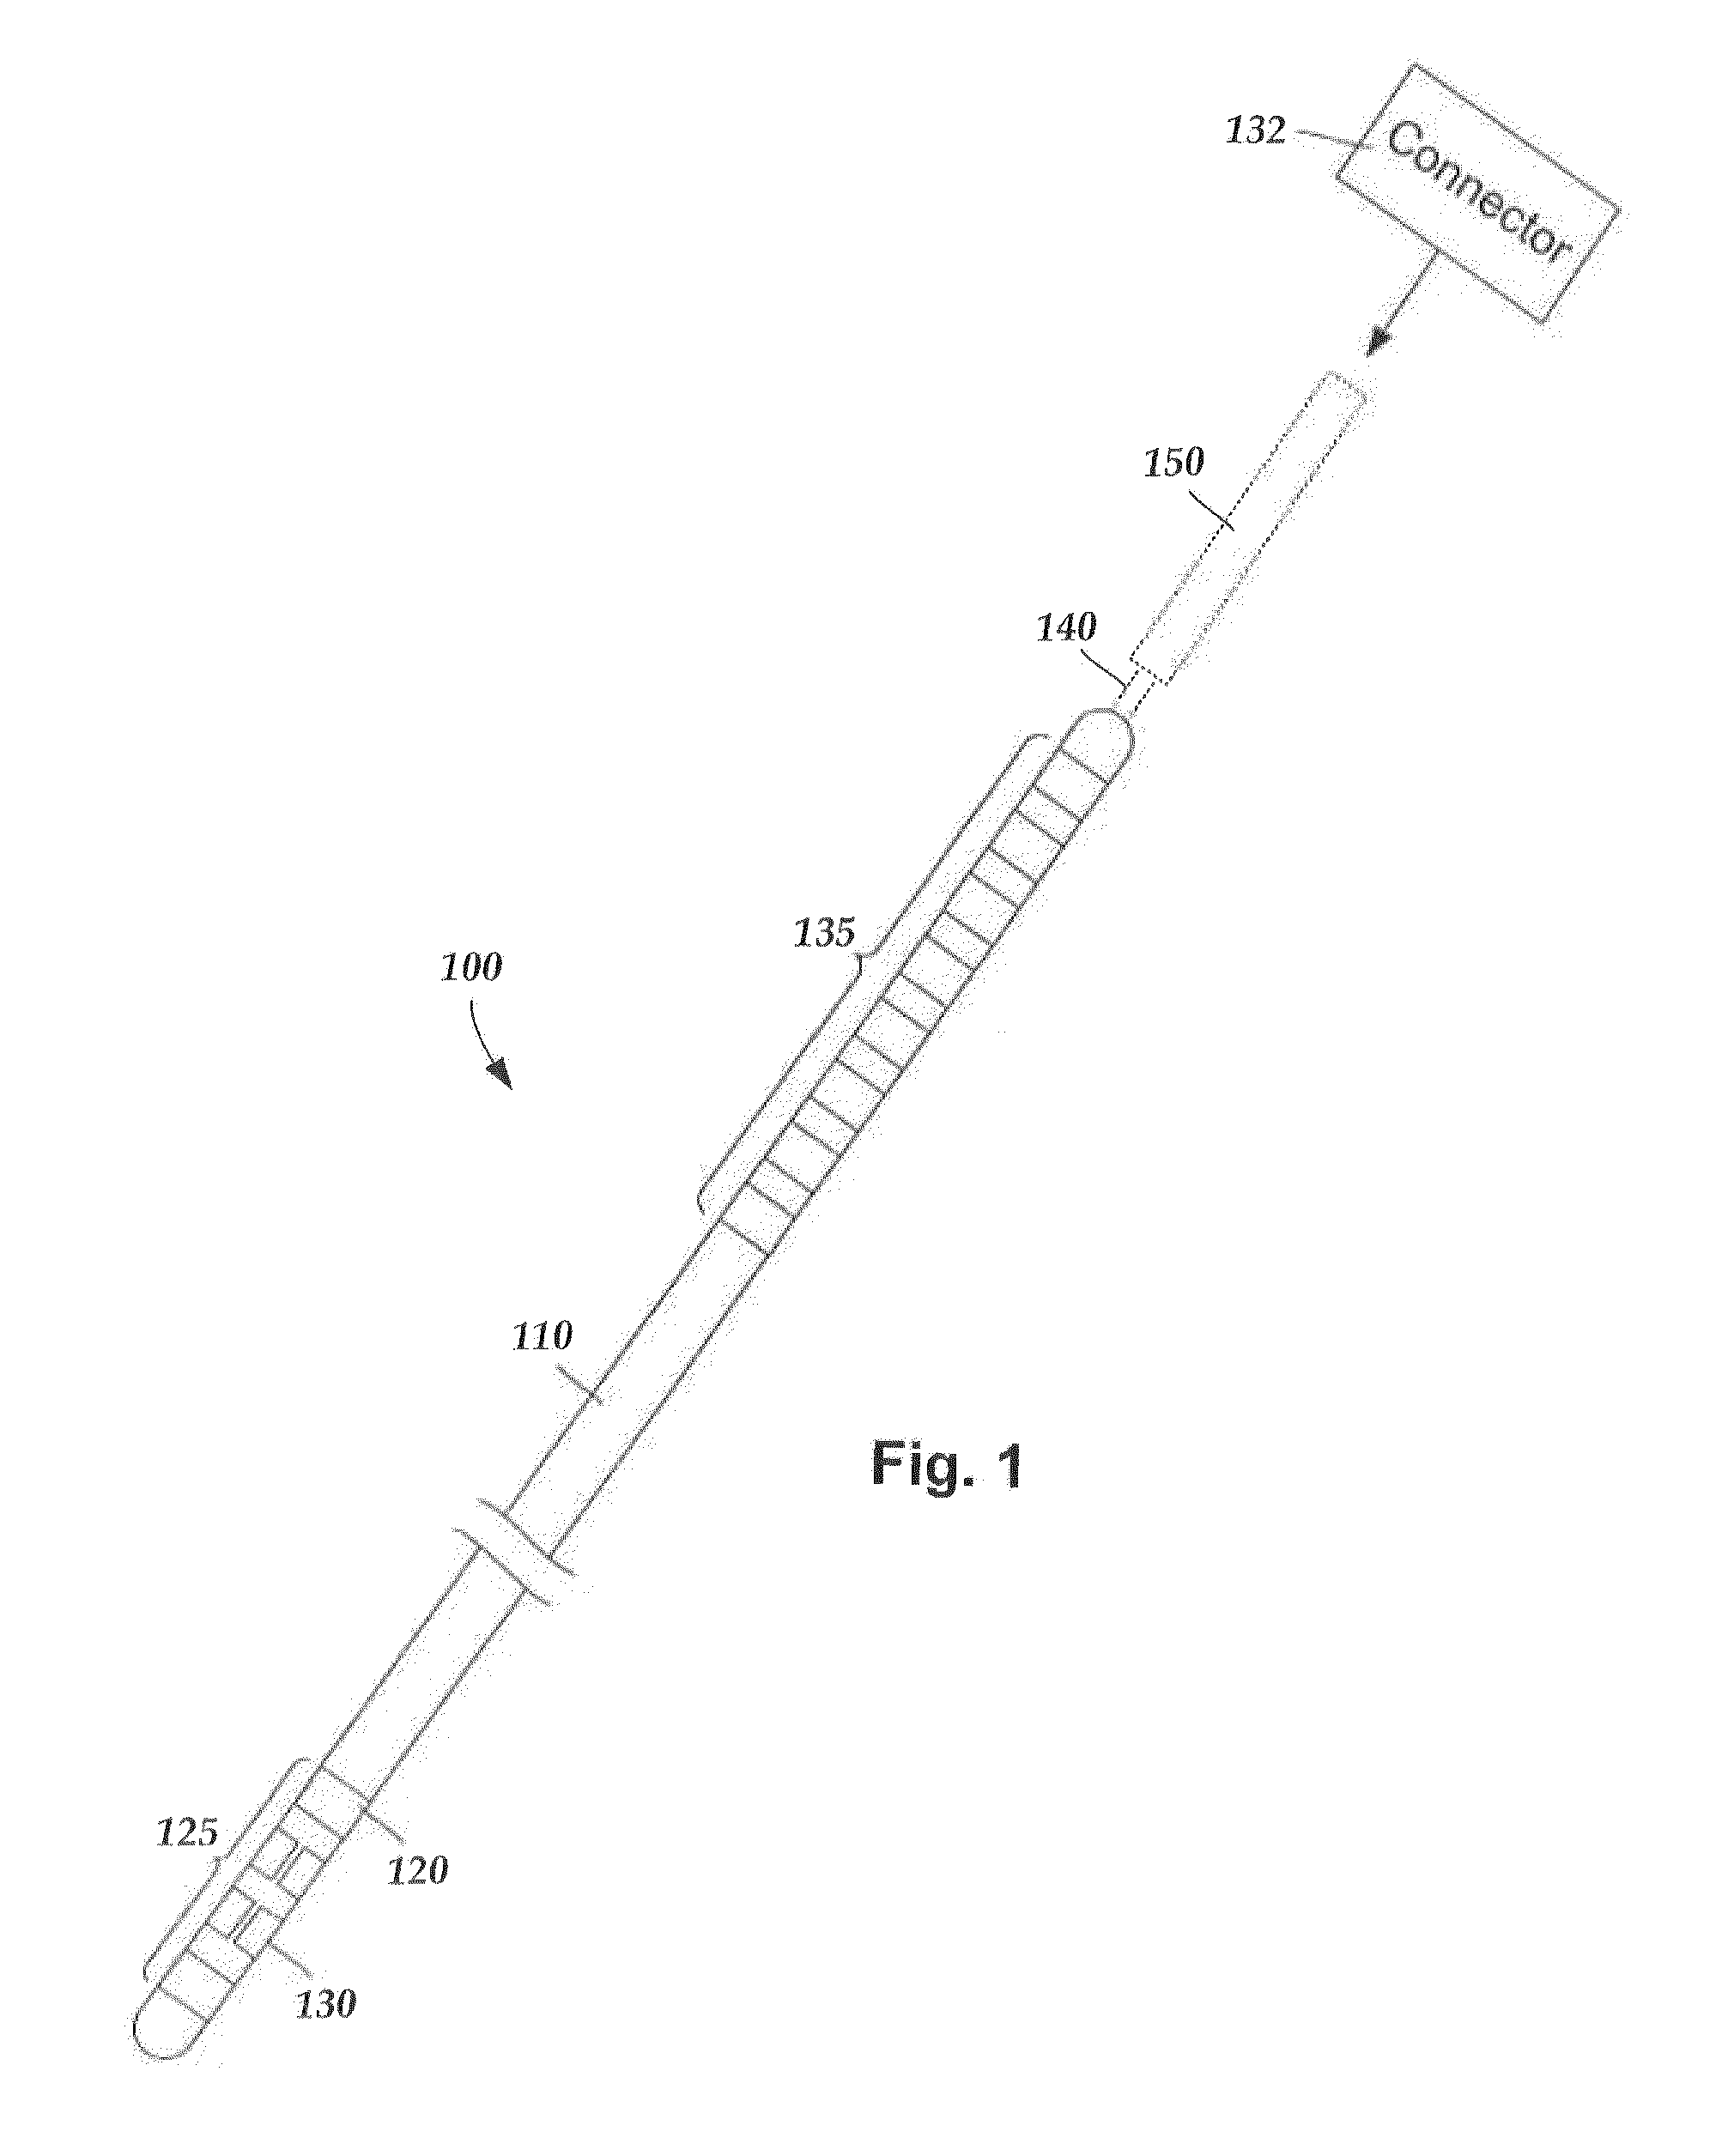 Segmented electrode leads formed from pre-electrodes with depressions or apertures and methods of making and using